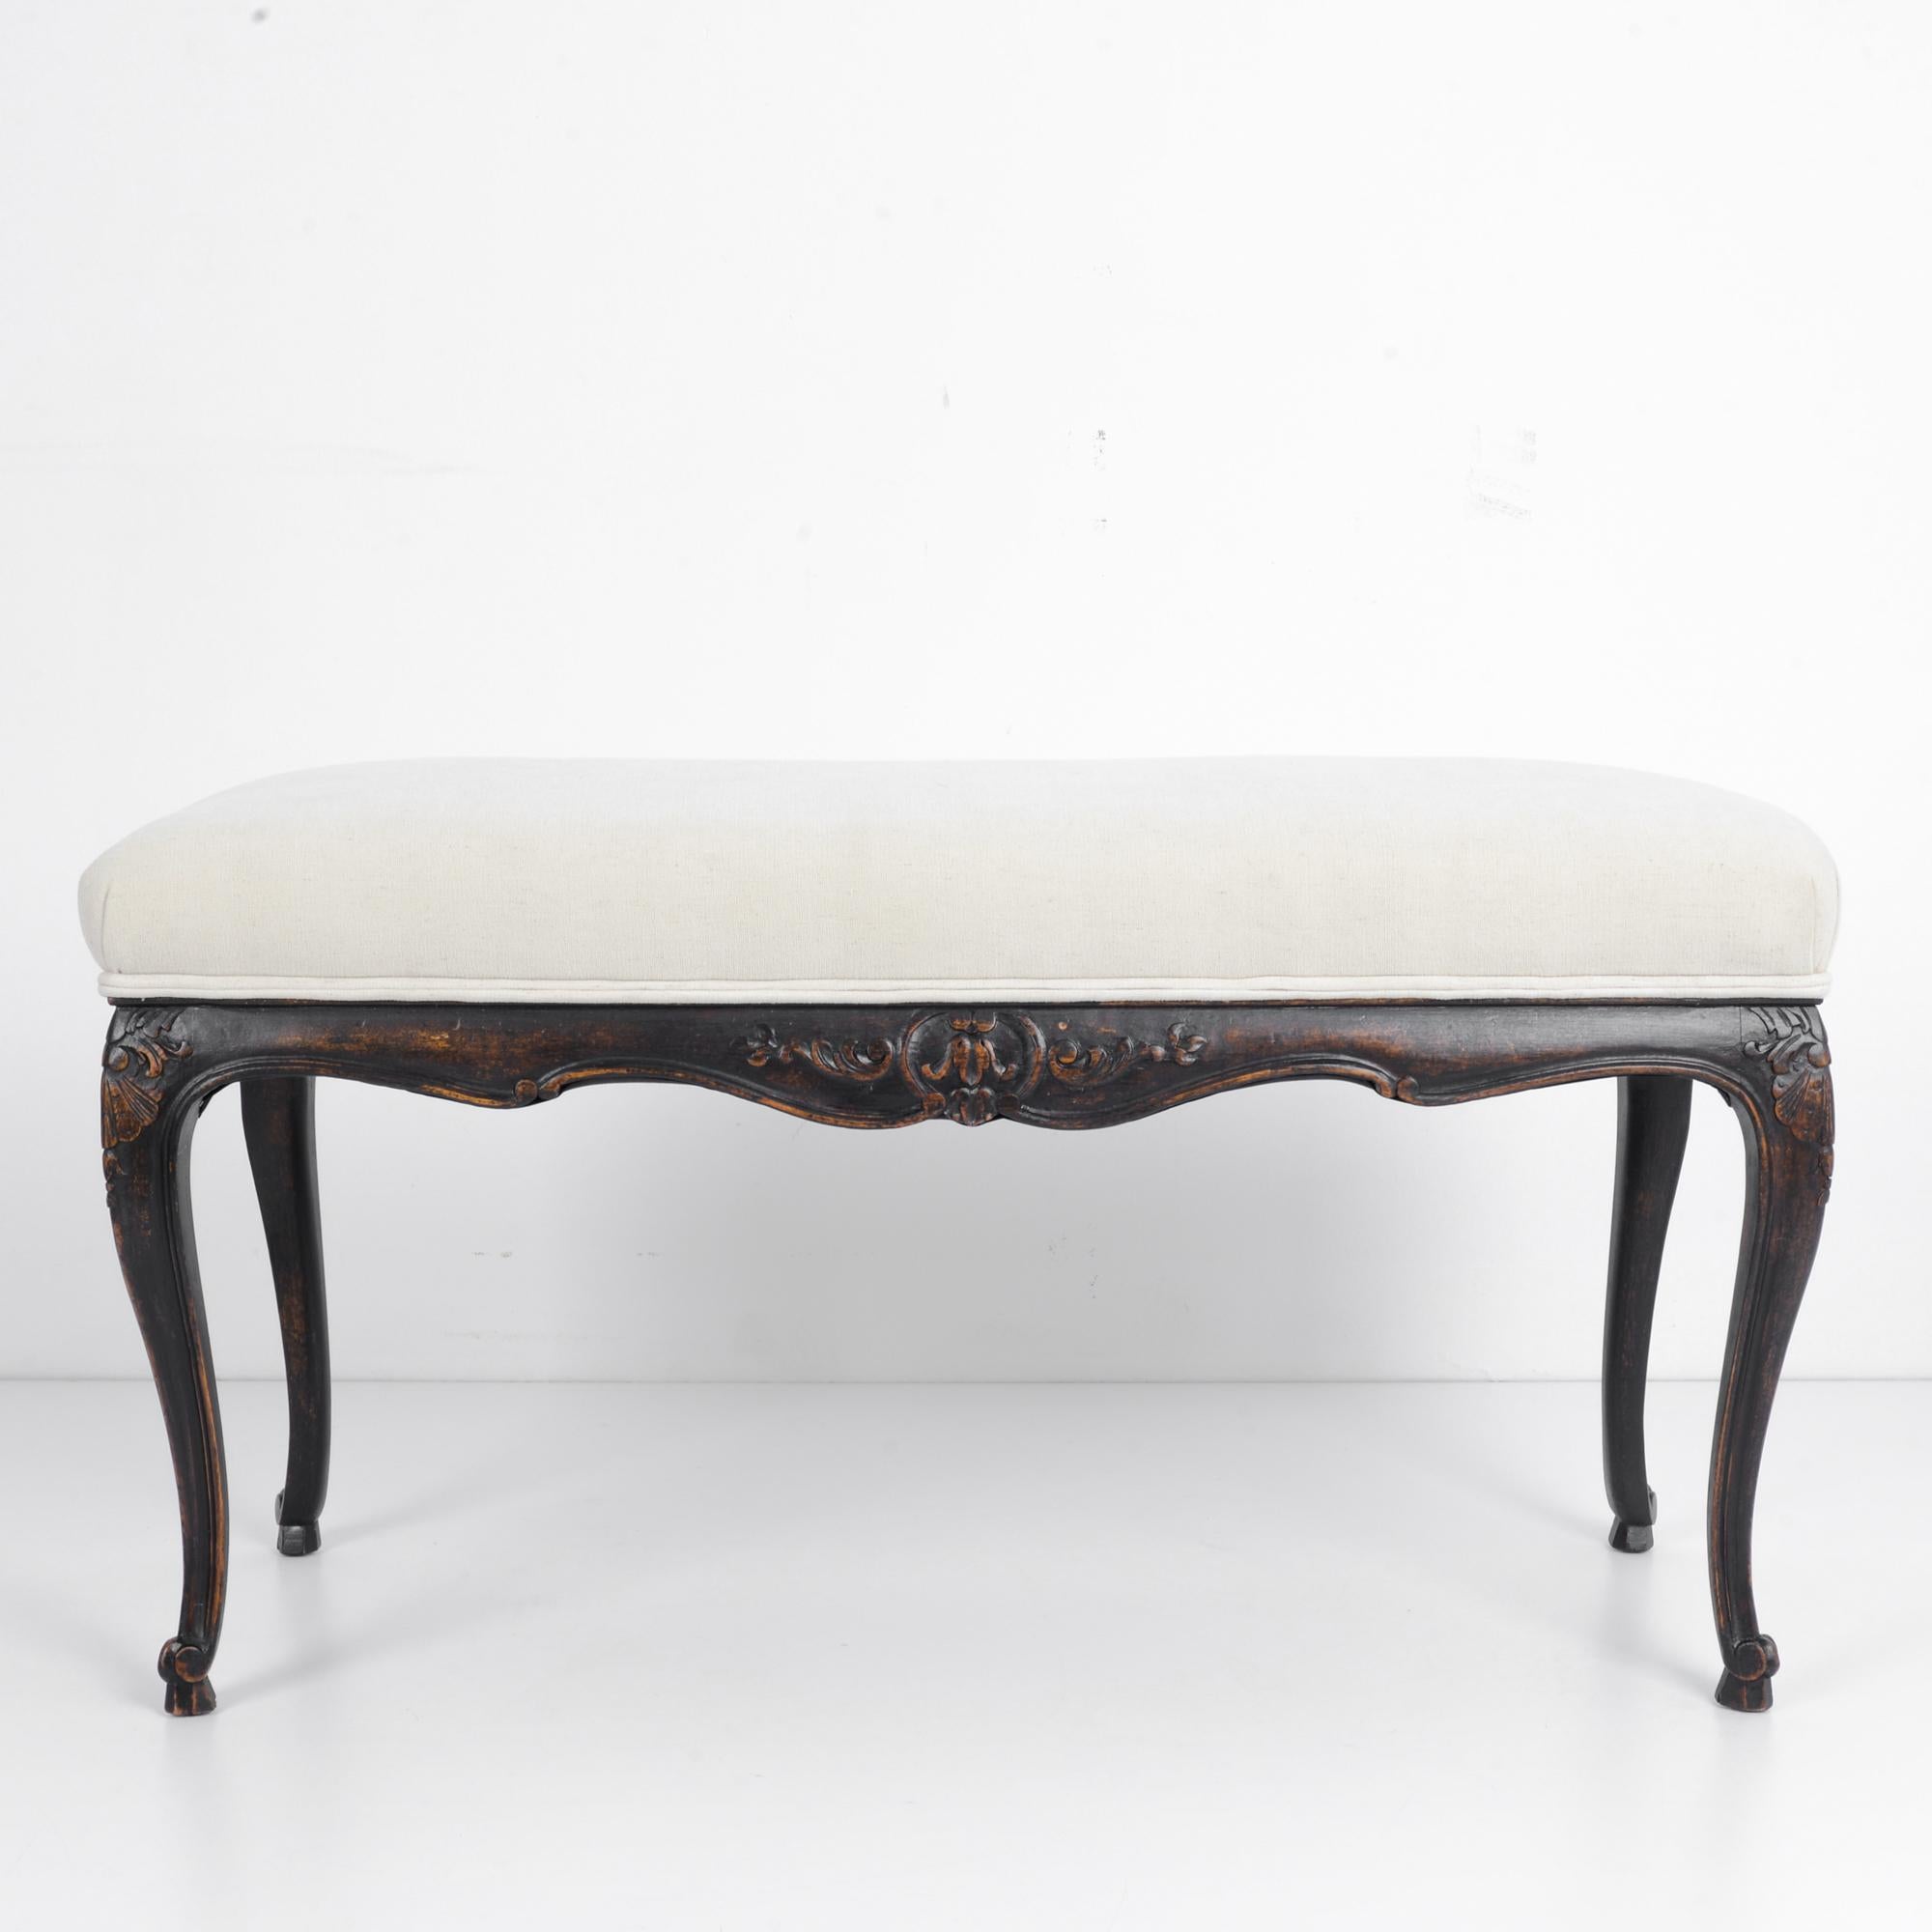 This wooden bench was made in France, circa 1950. The ivory white upholstered and well-padded seat brings out the intense shade and beautiful patina of the wood. The curves of its cabriole legs, scalloped apron, and intricate floral carvings add